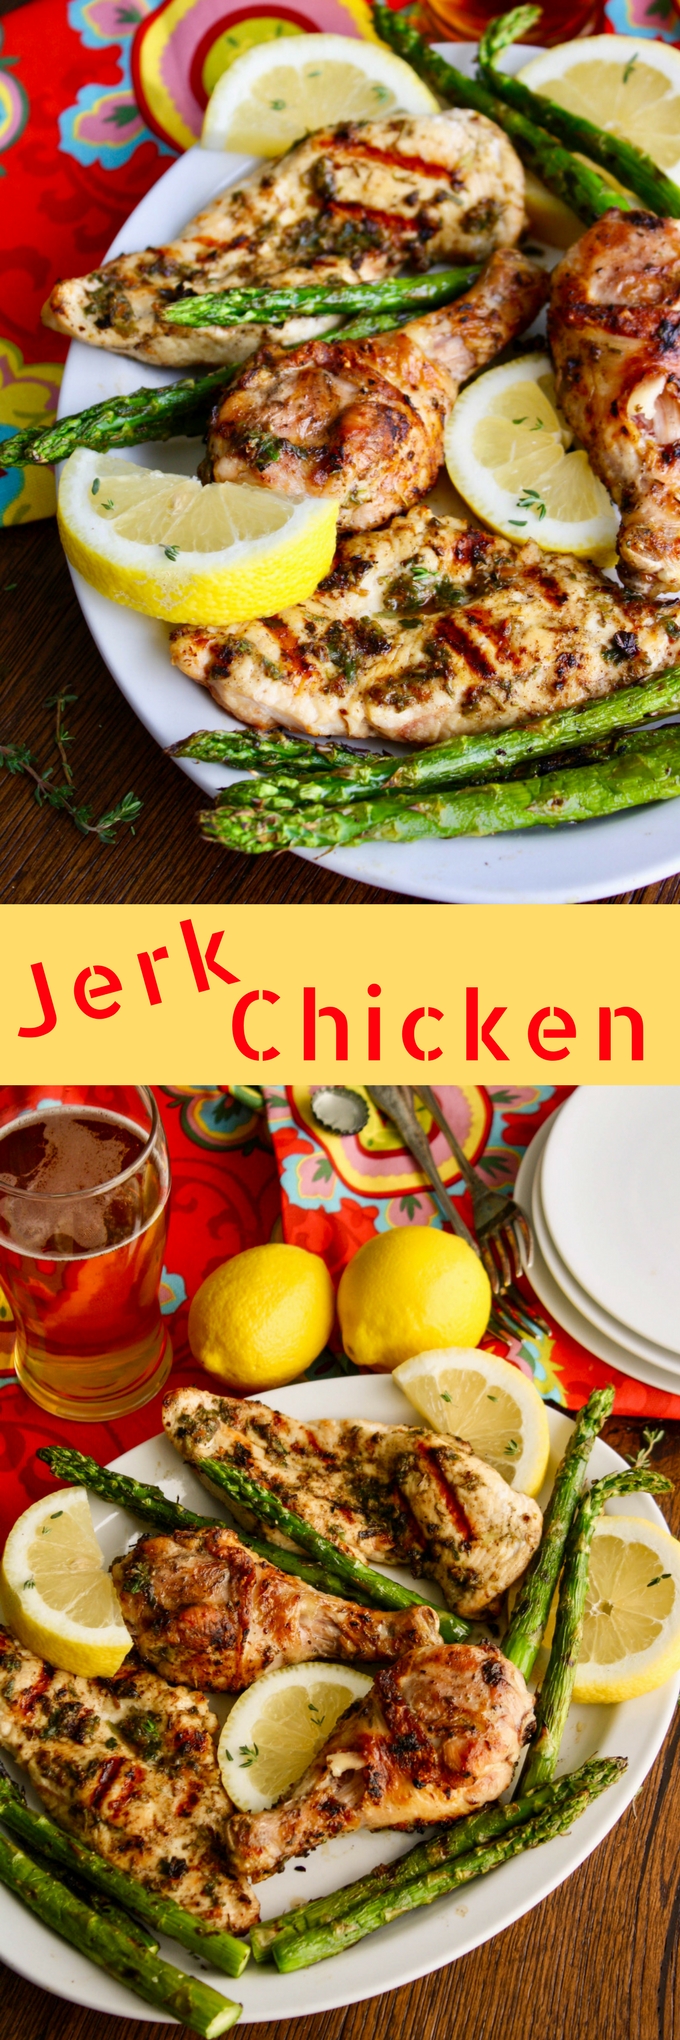 Jerk chicken is the way to go when you're looking for a great recipe for the grill. The flavors are terrific!